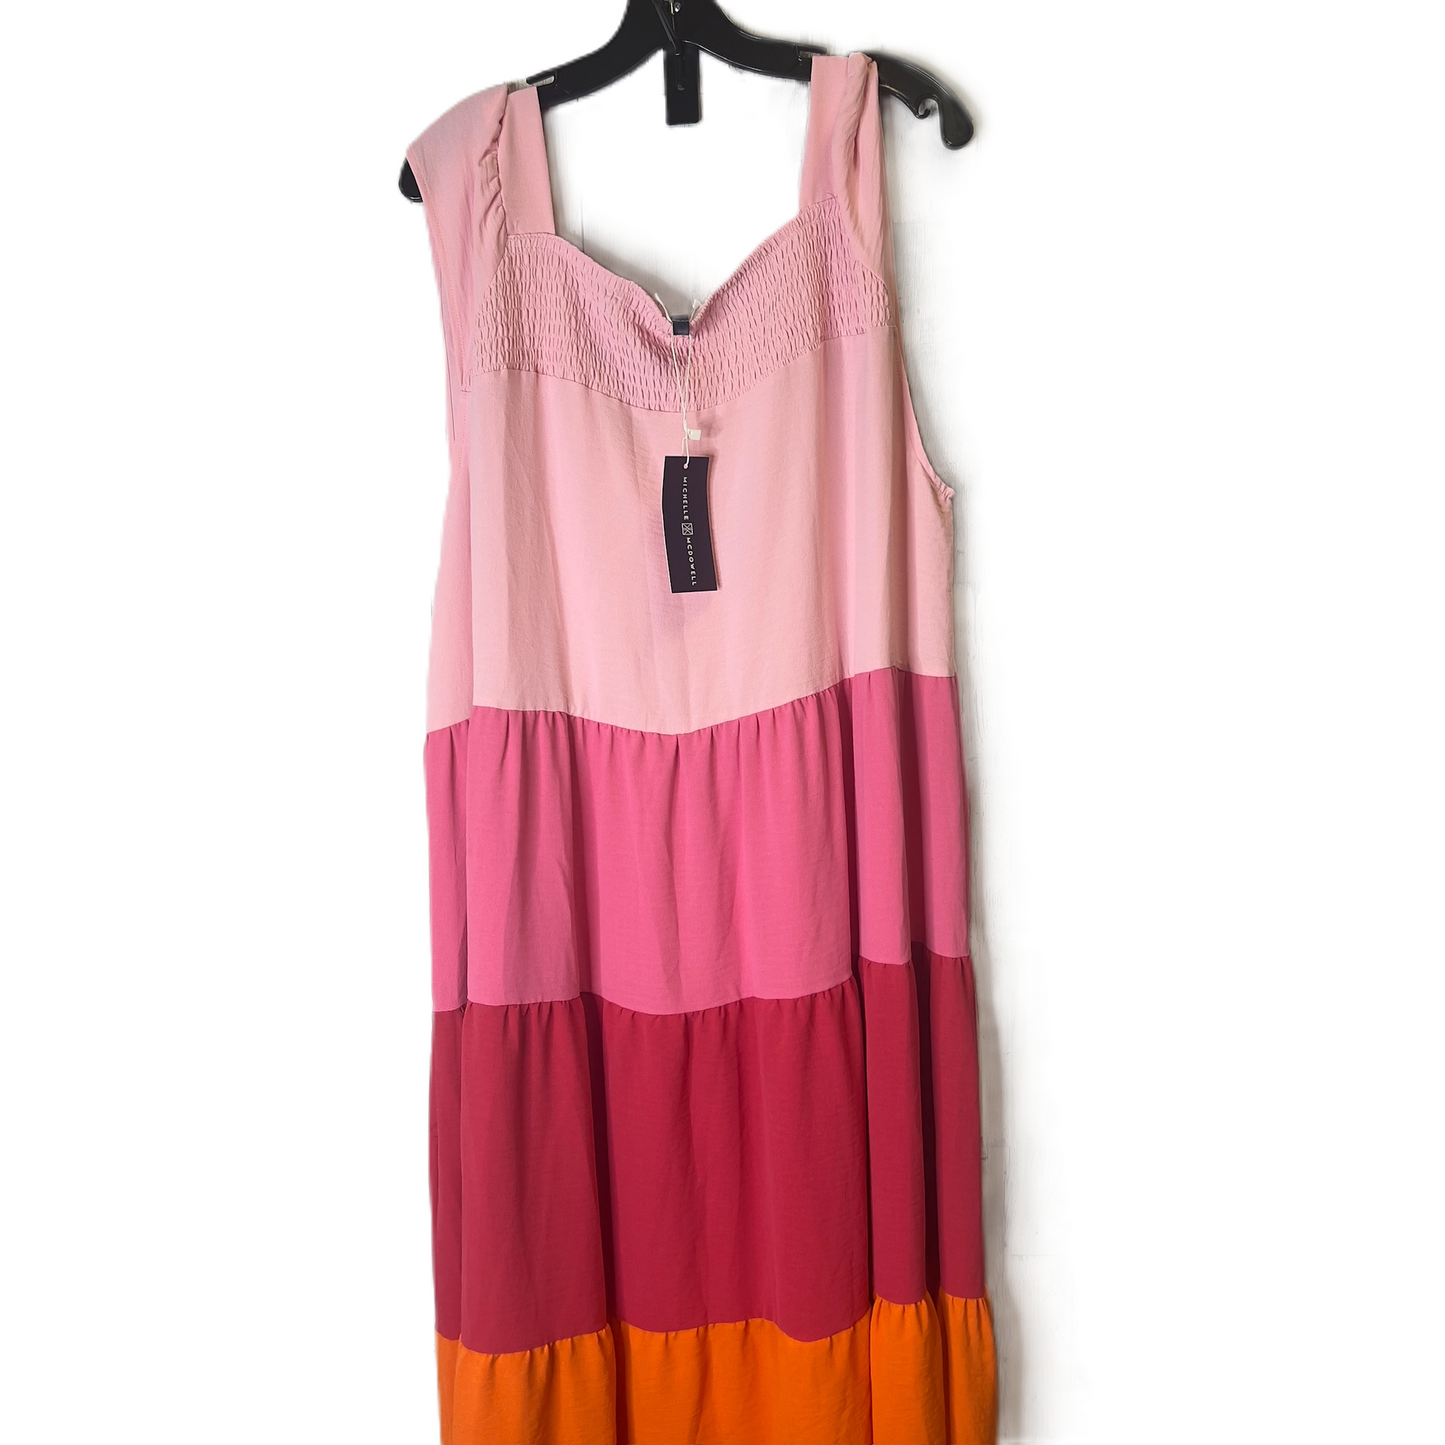 Pink Dress Casual Midi By Clothes Mentor, Size: 1x